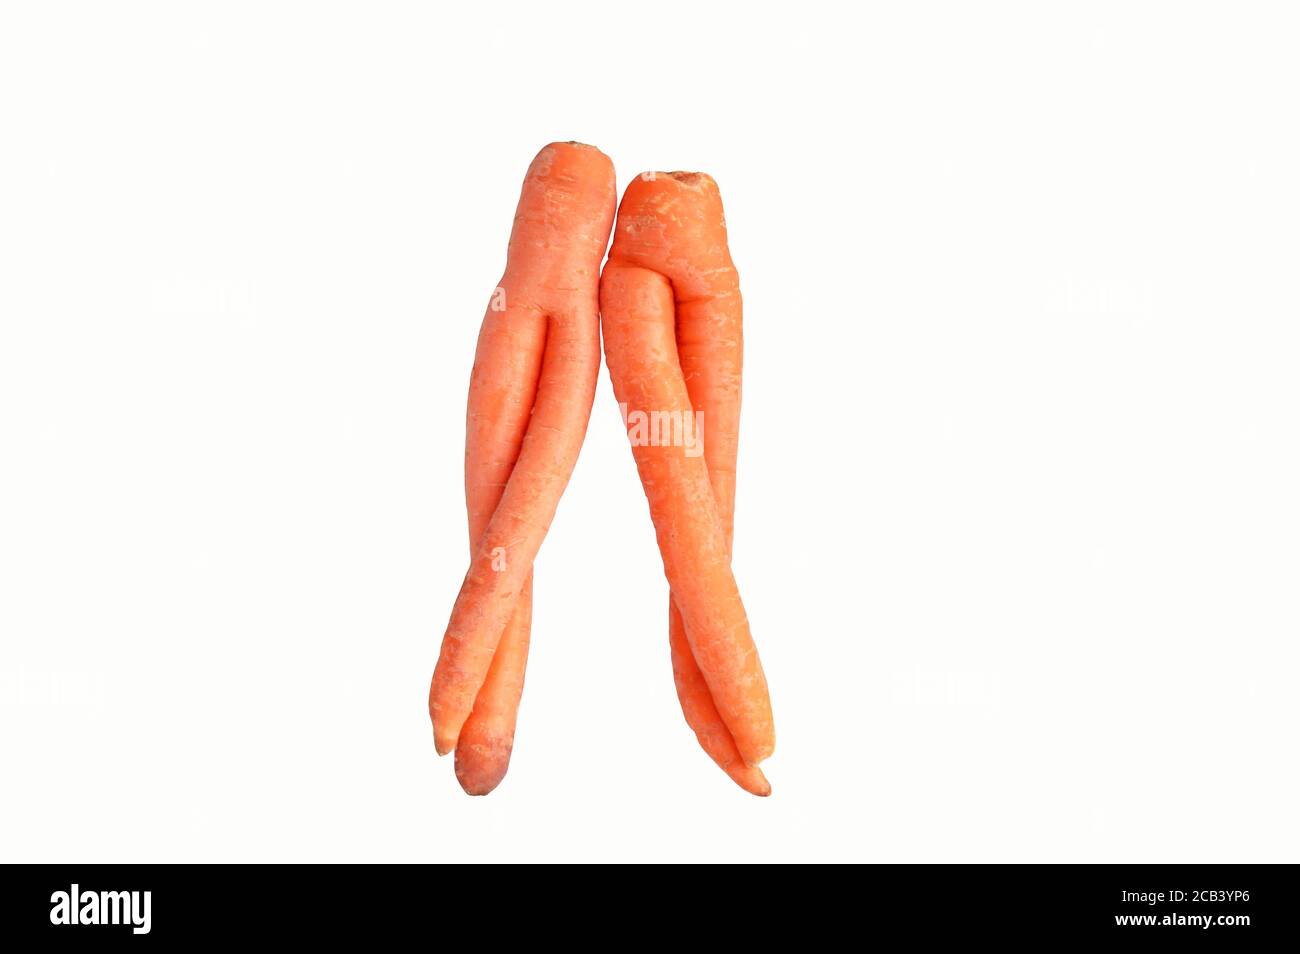 Human shaped carrot couple standing side by side Stock Photo